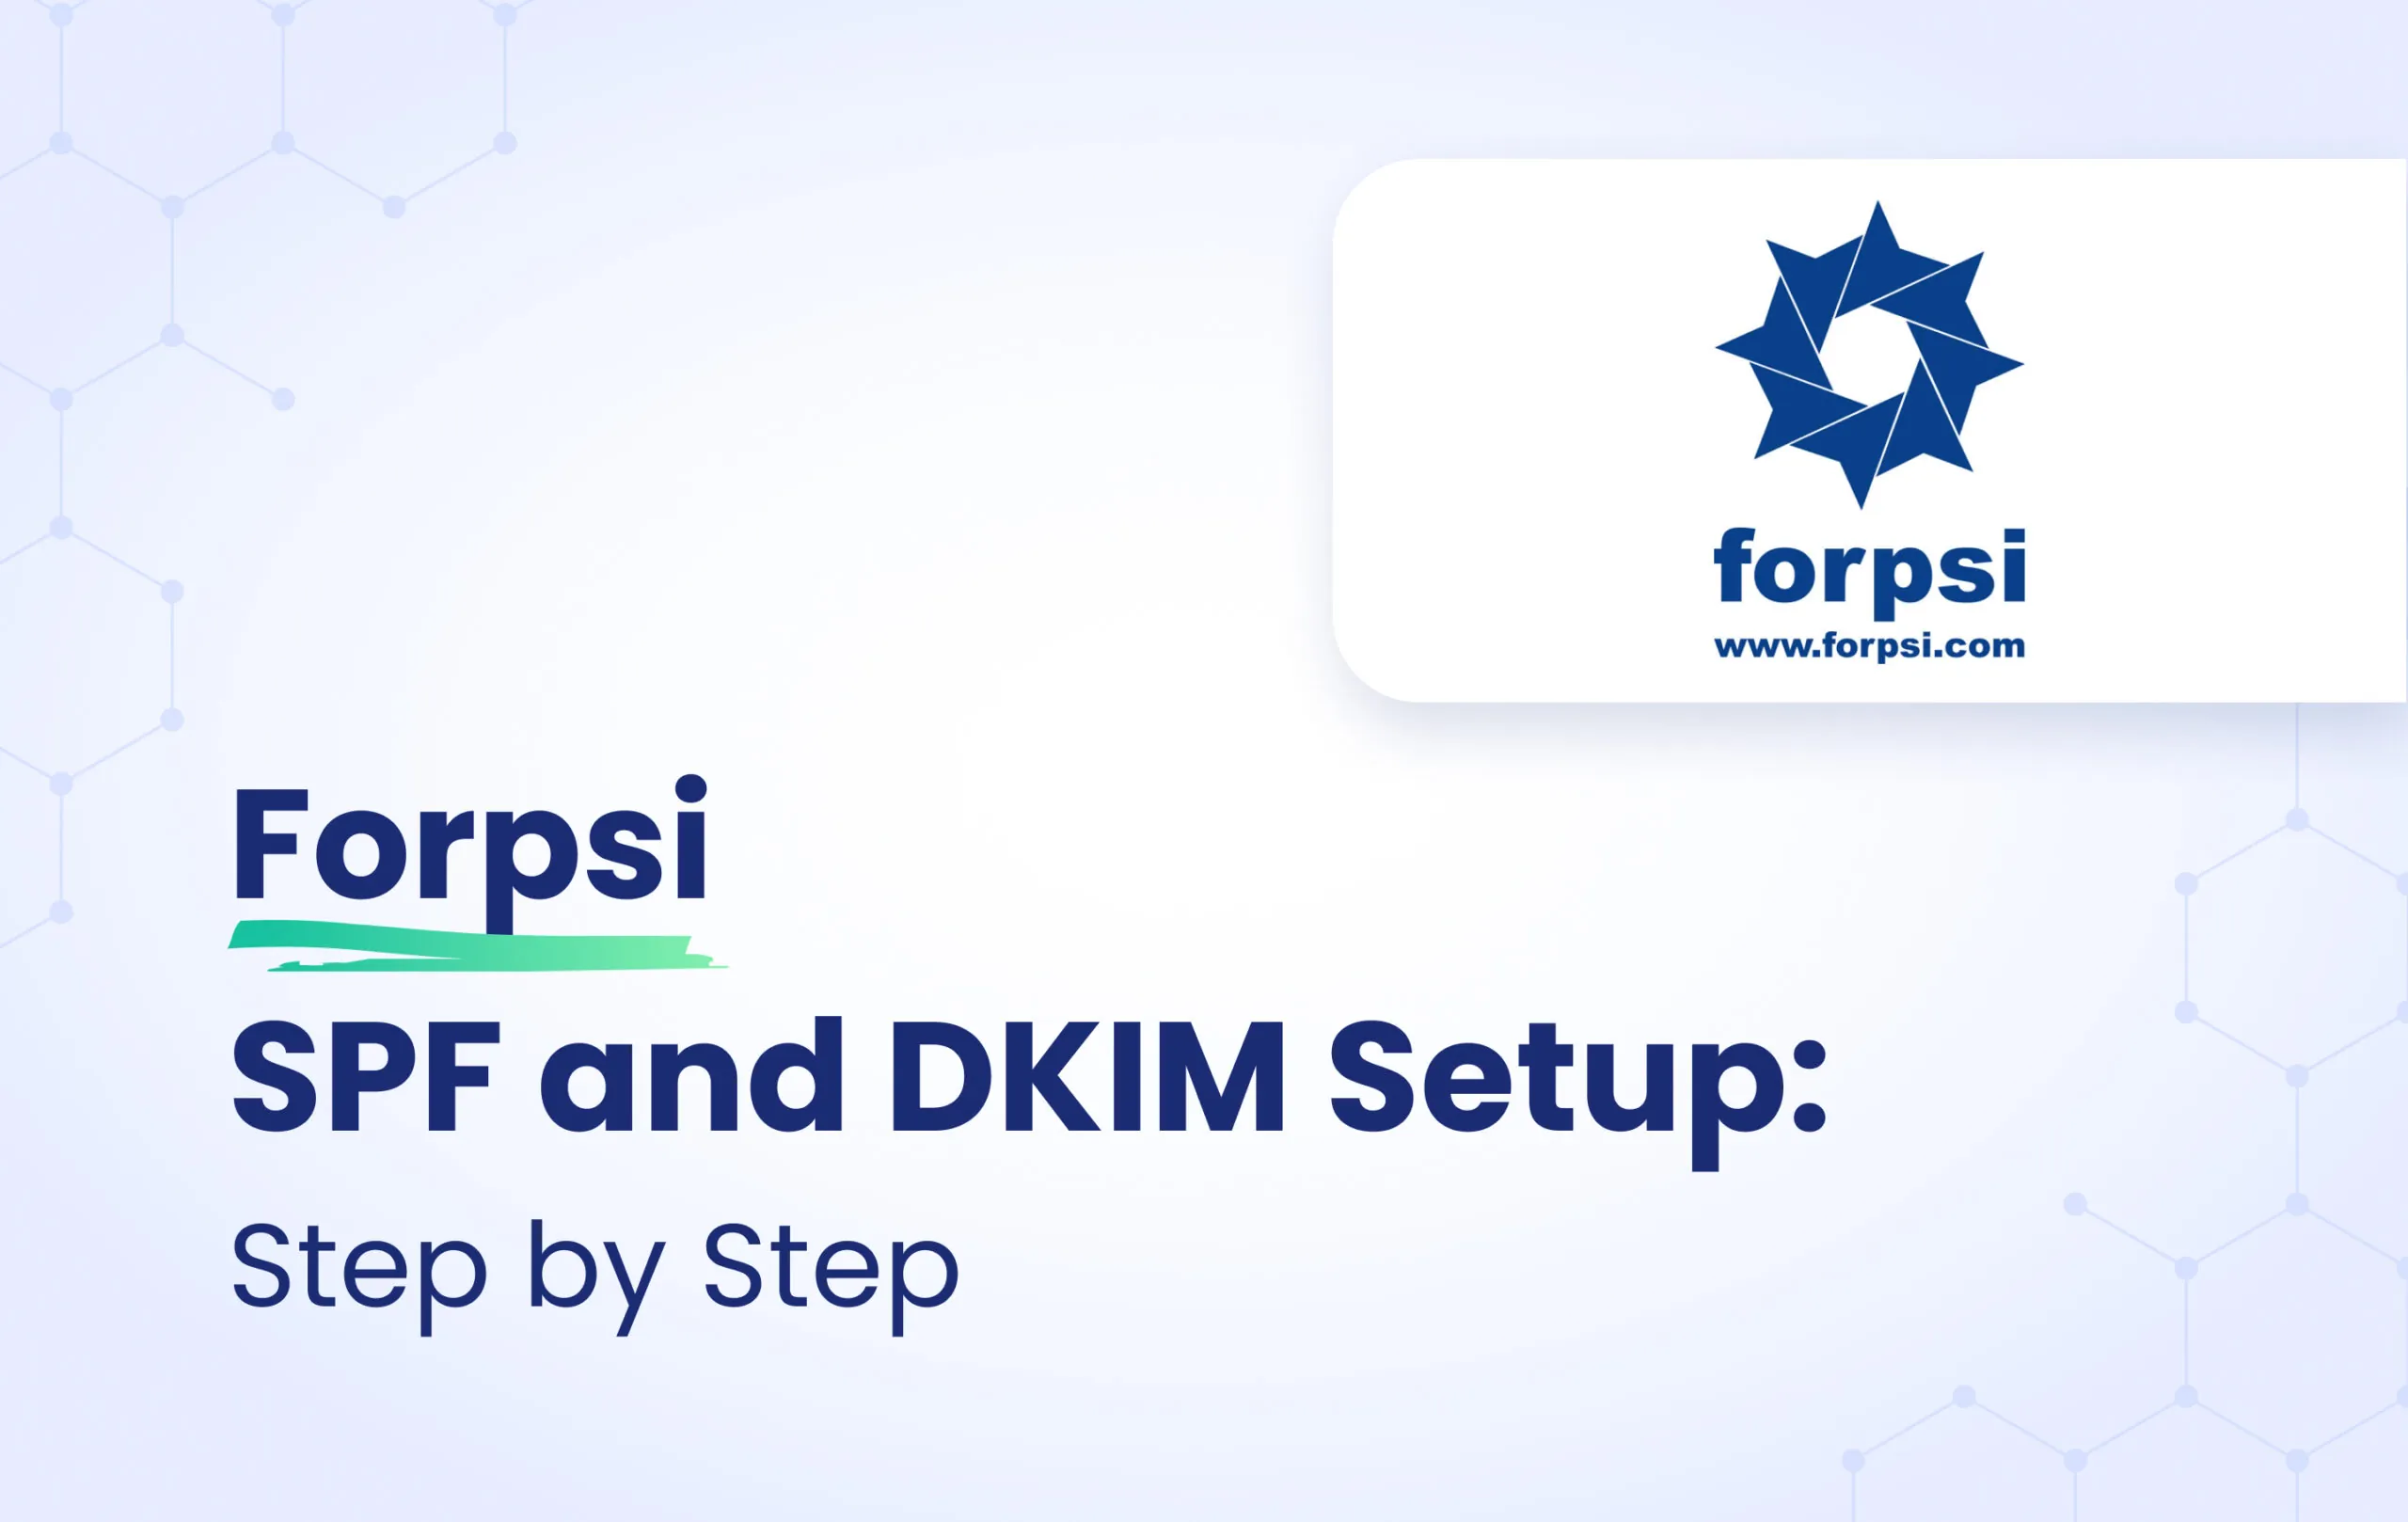 Forpsi SPF and DKIM configuration